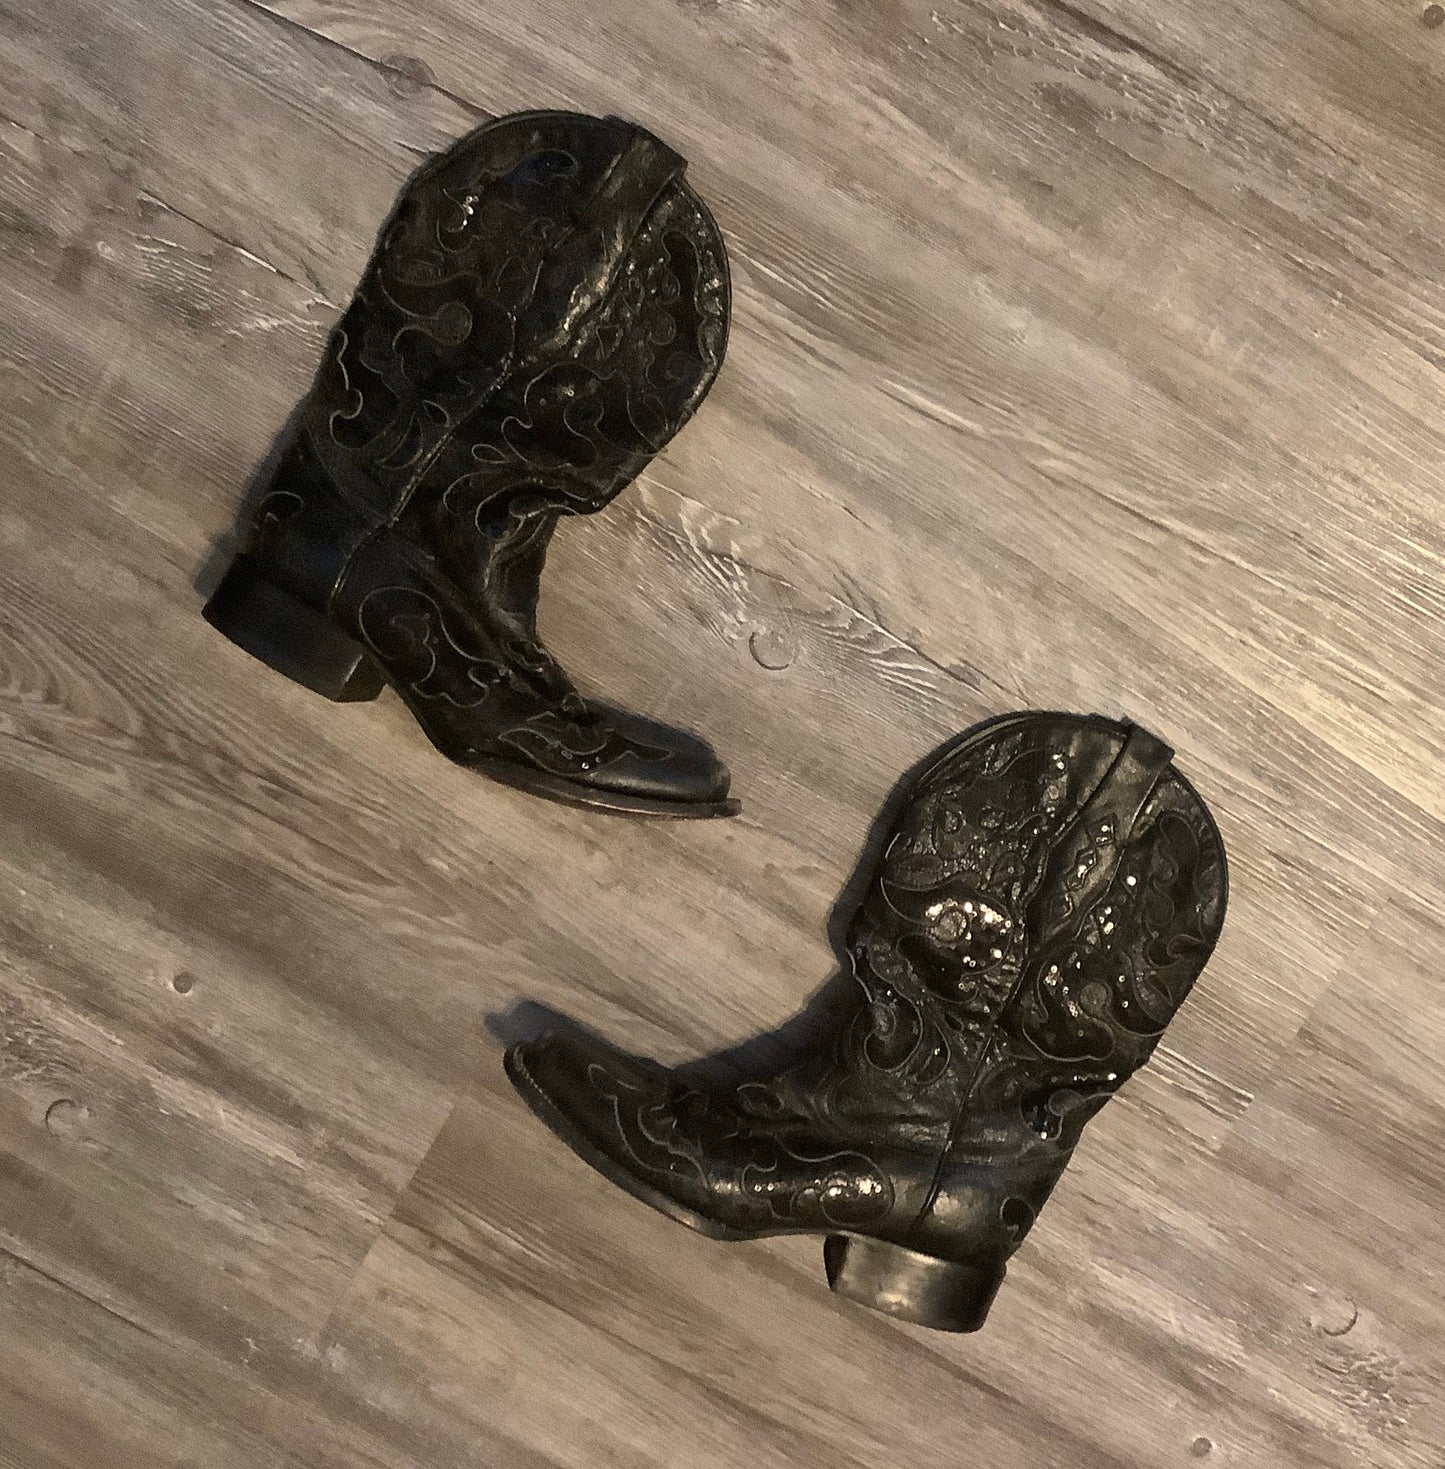 Black Boots Western Corral, Size 9.5